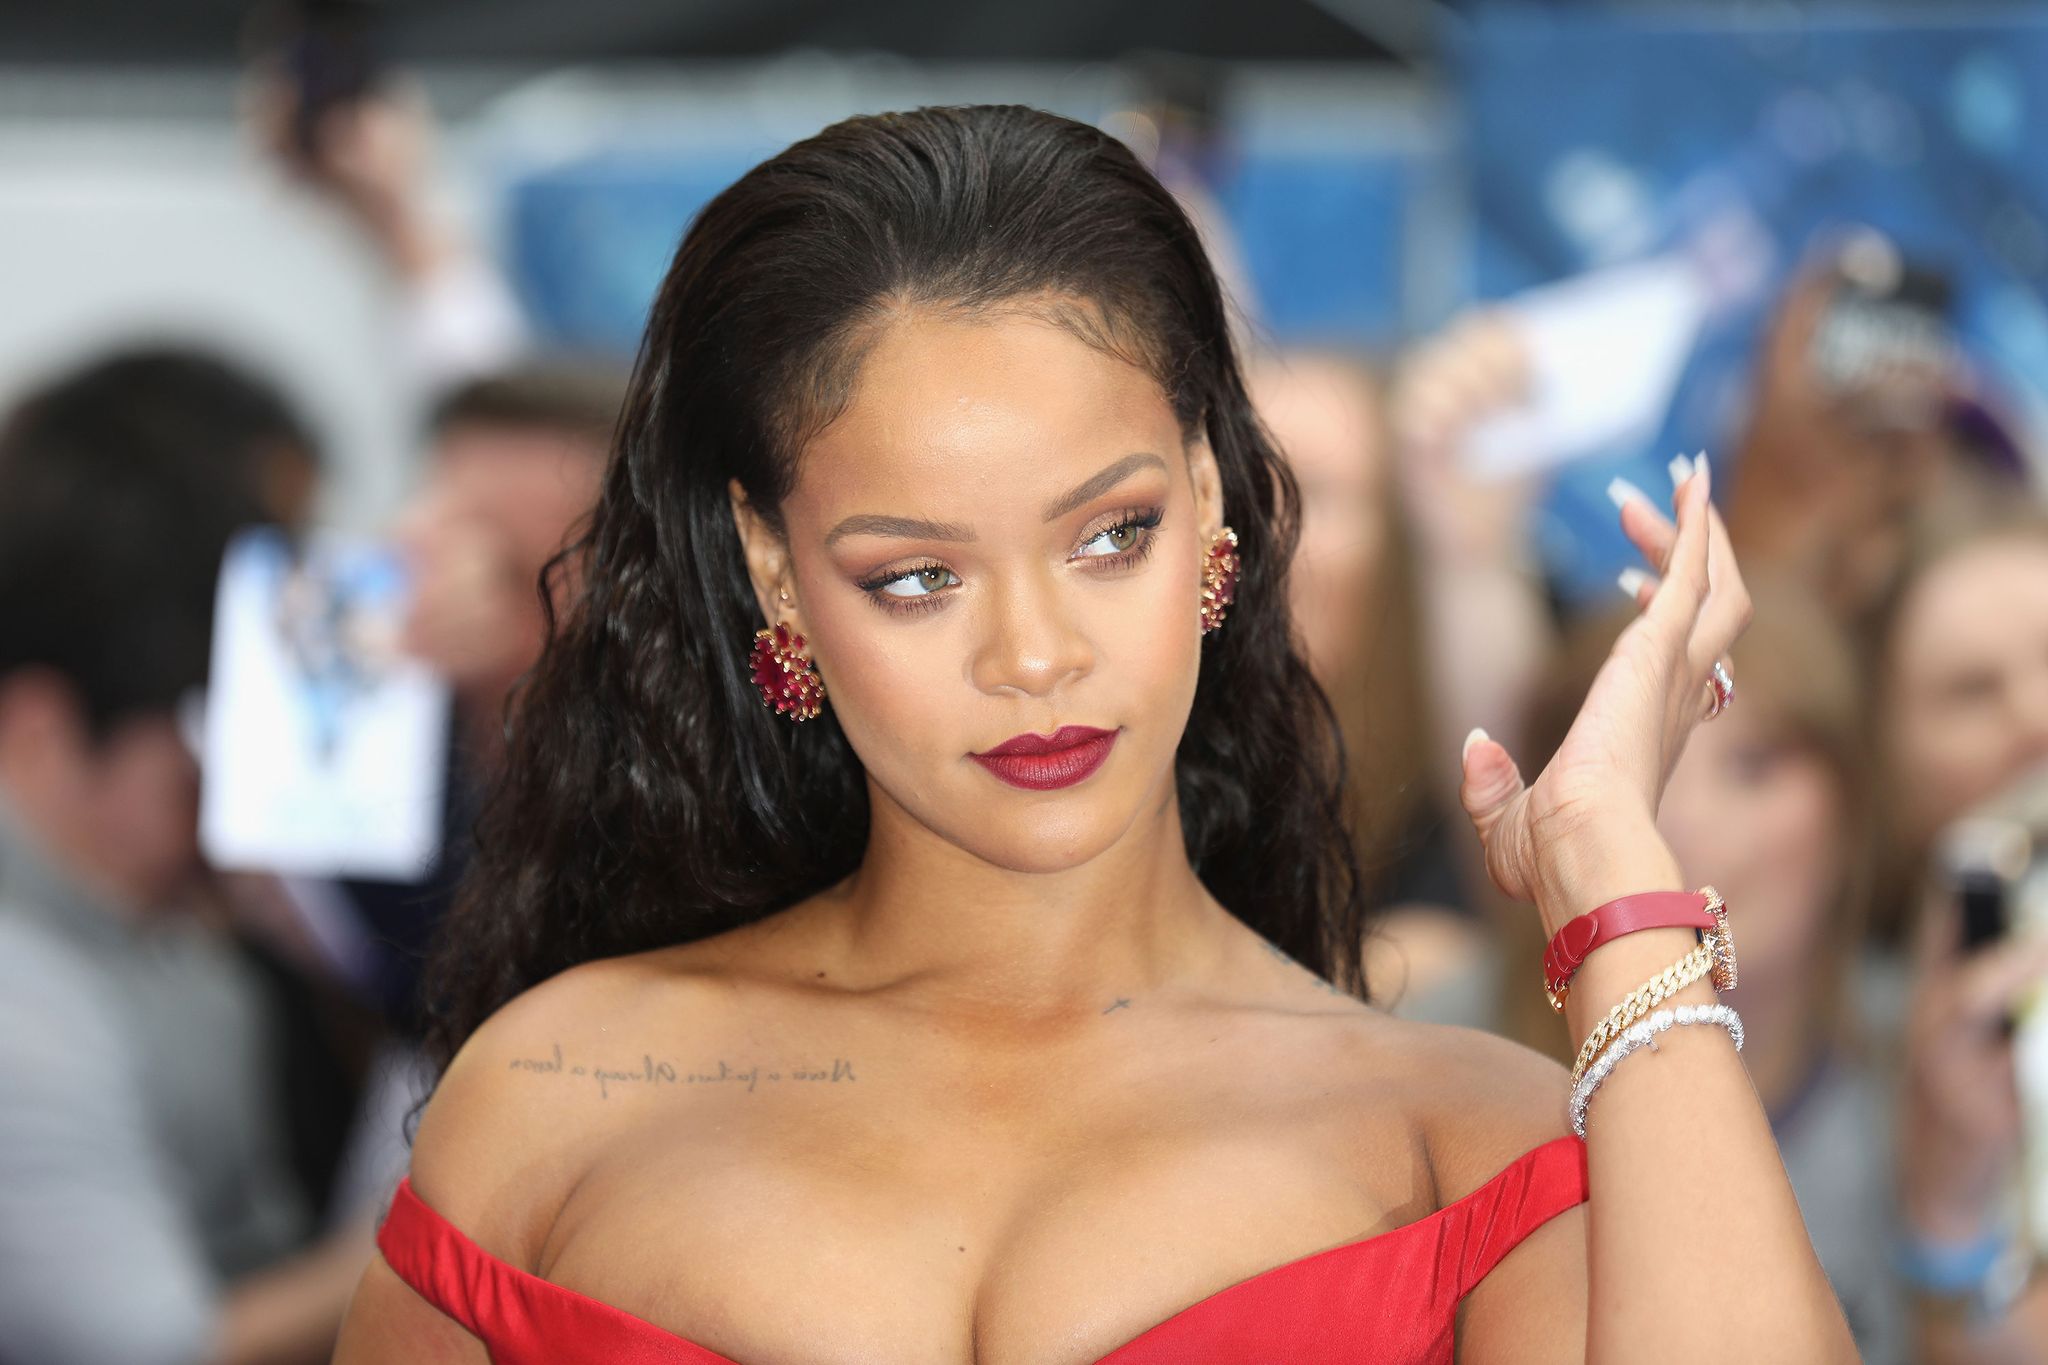 Rihanna Did Her Fashion Research With This Rare Bag